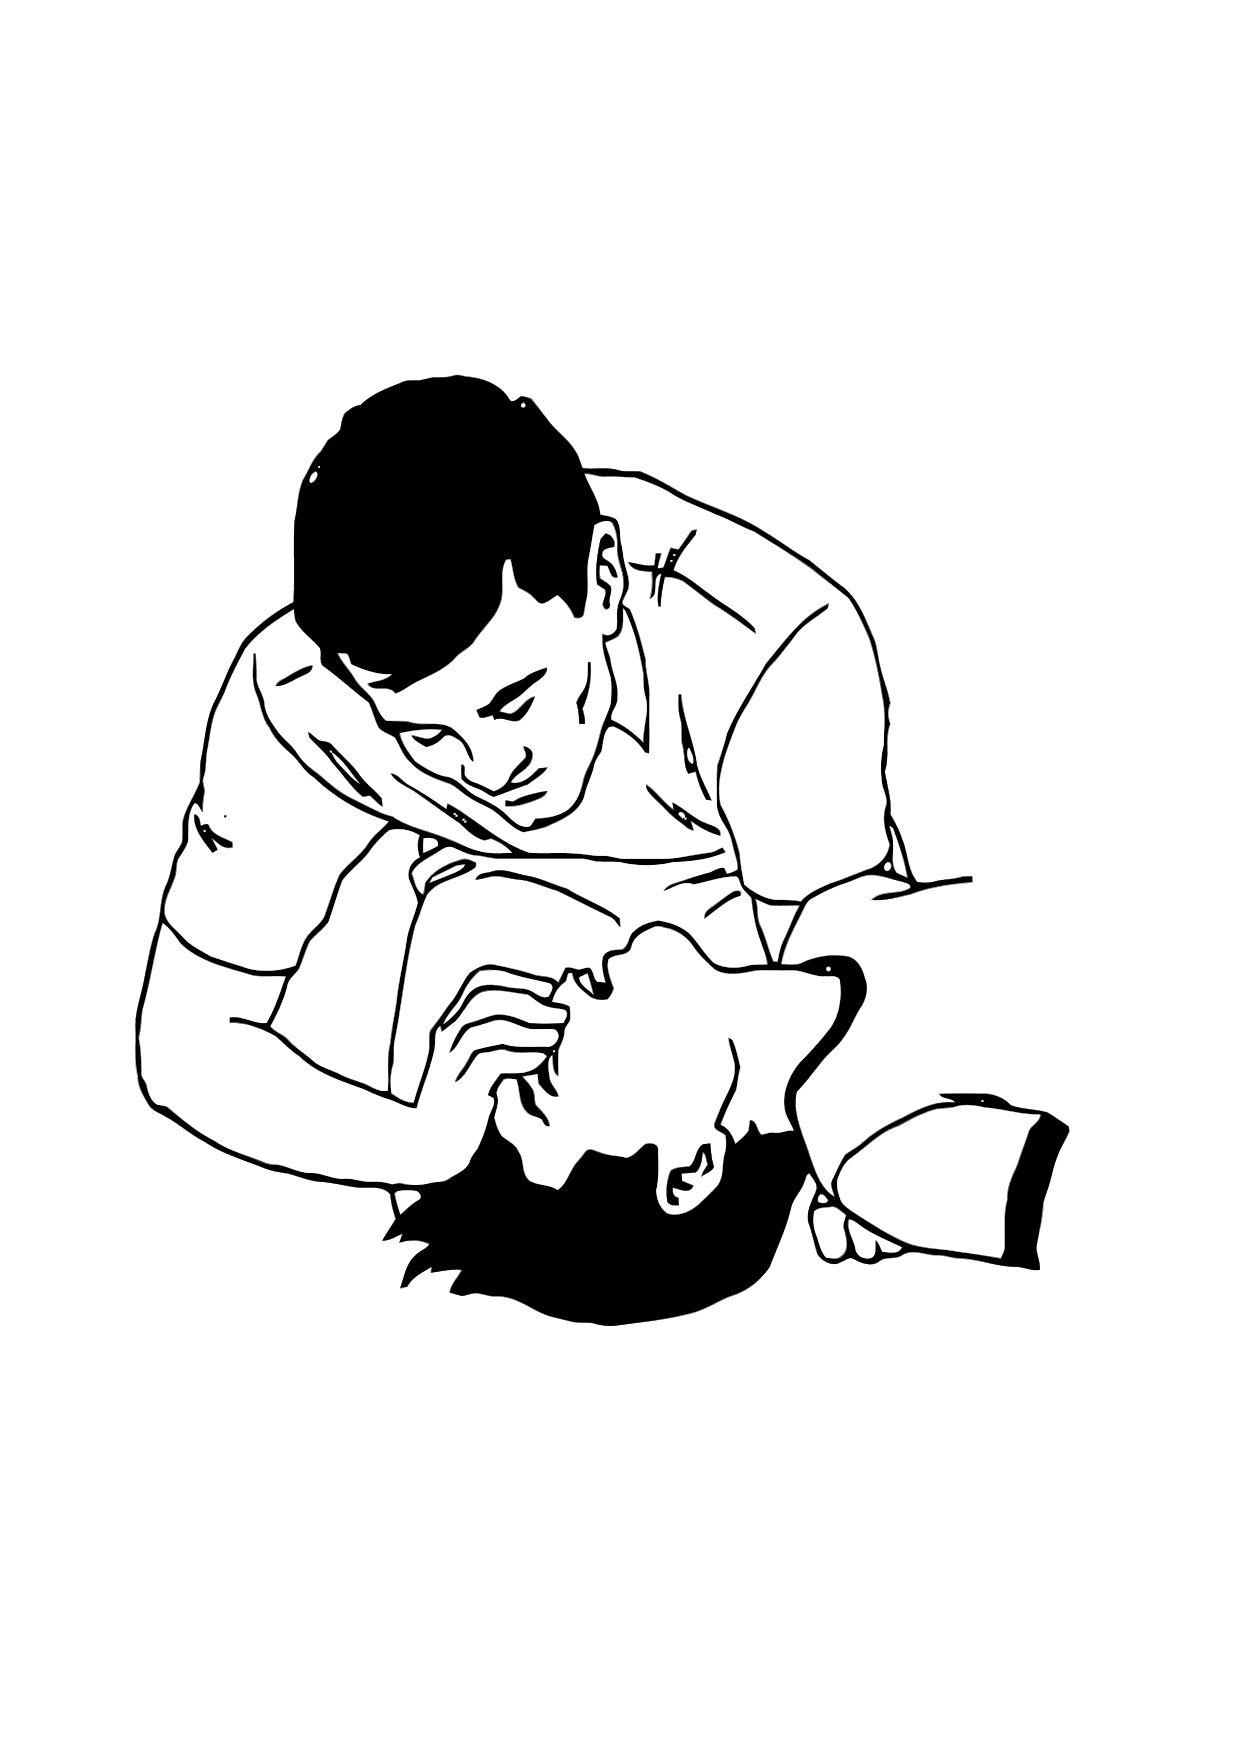 Coloring Page mouth to mouth resuscitation - free printable coloring pages